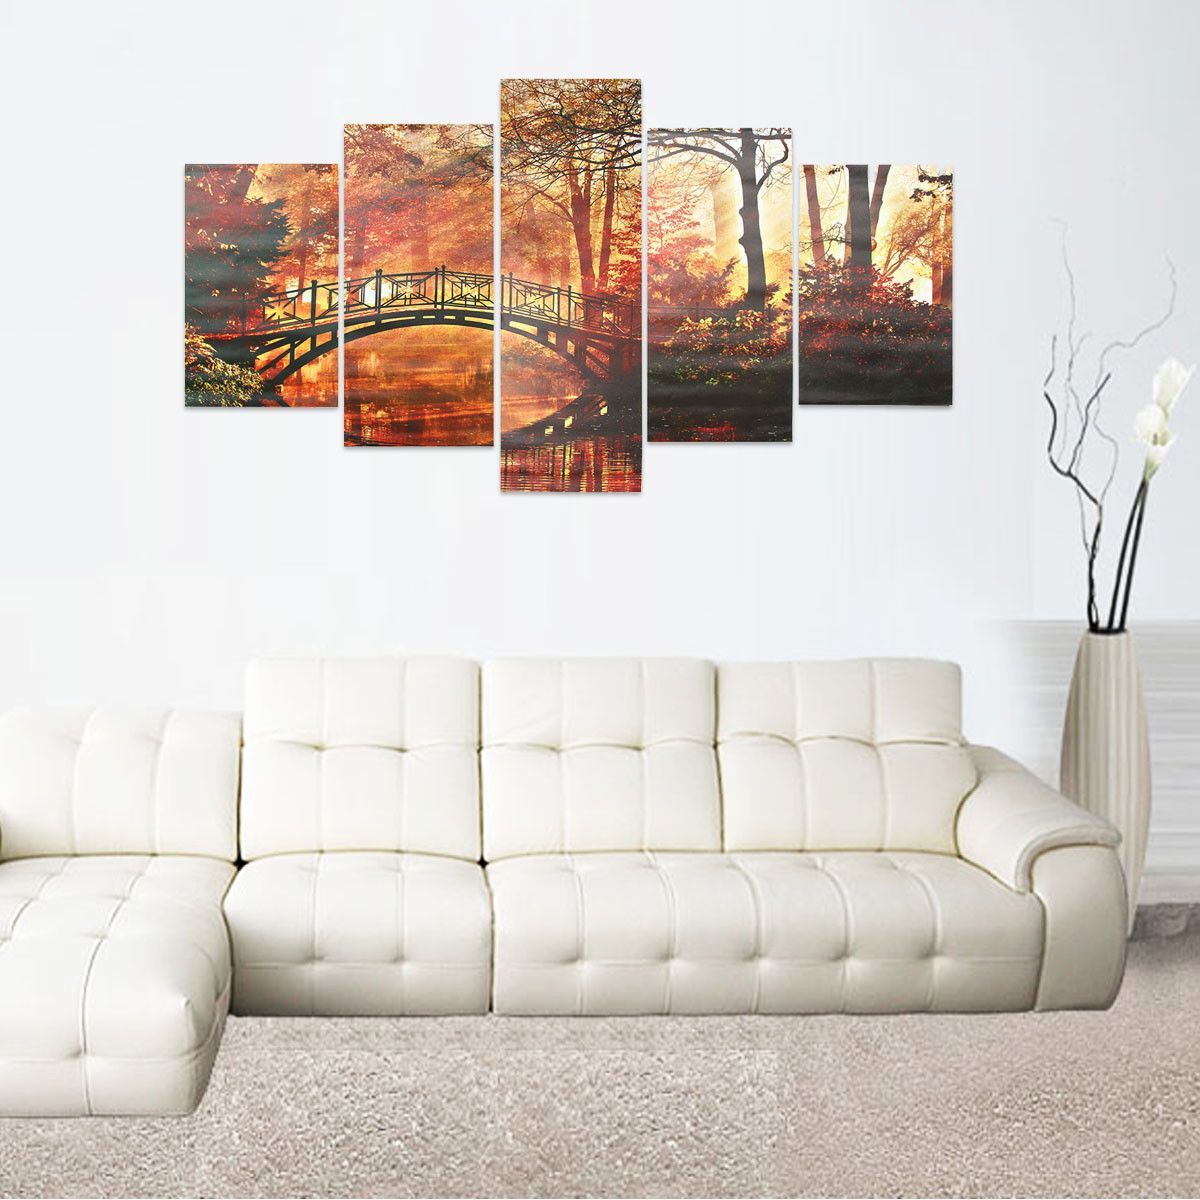 Huge-Modern-Abstract-Wall-Decor-Art-Paintings-Canvas-No-Frame-Home-Decorations-1470954